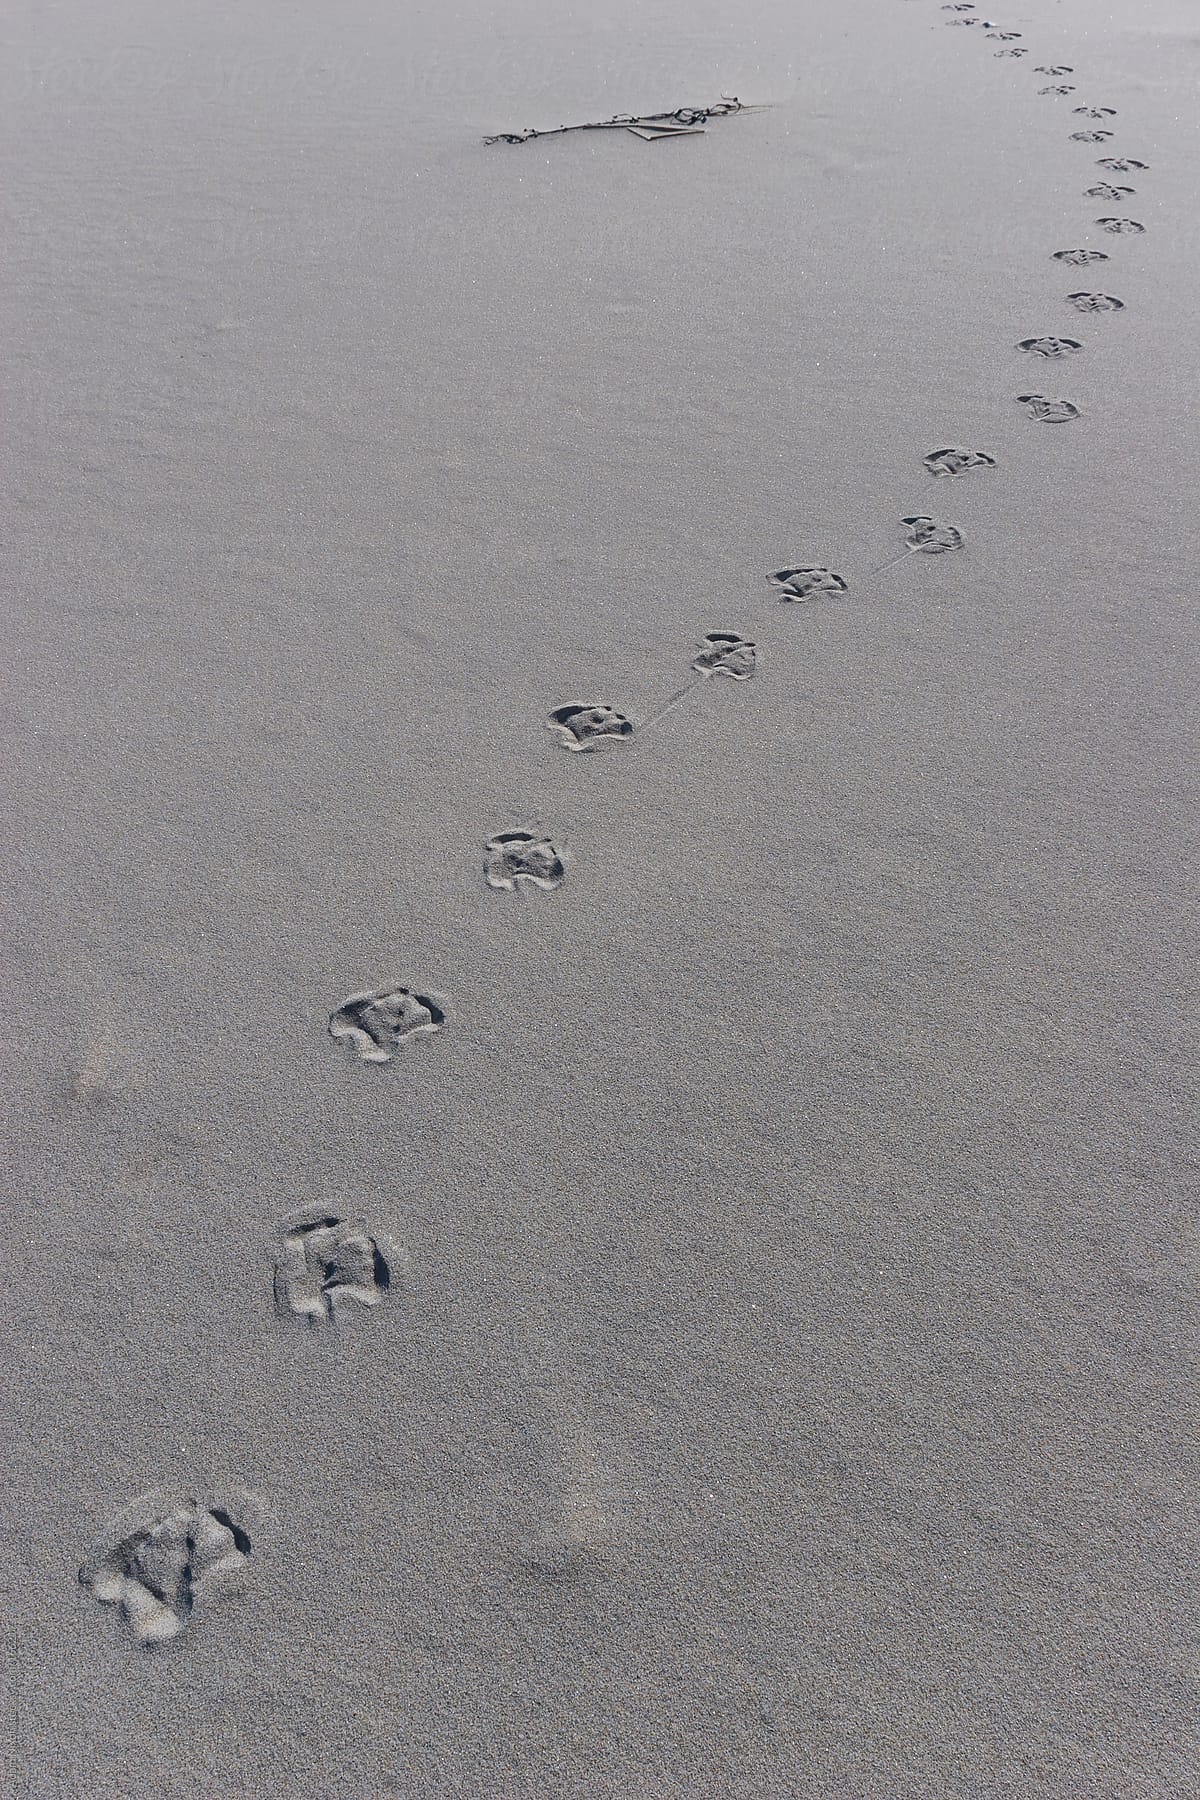 Animal Foot Prints in the Sand